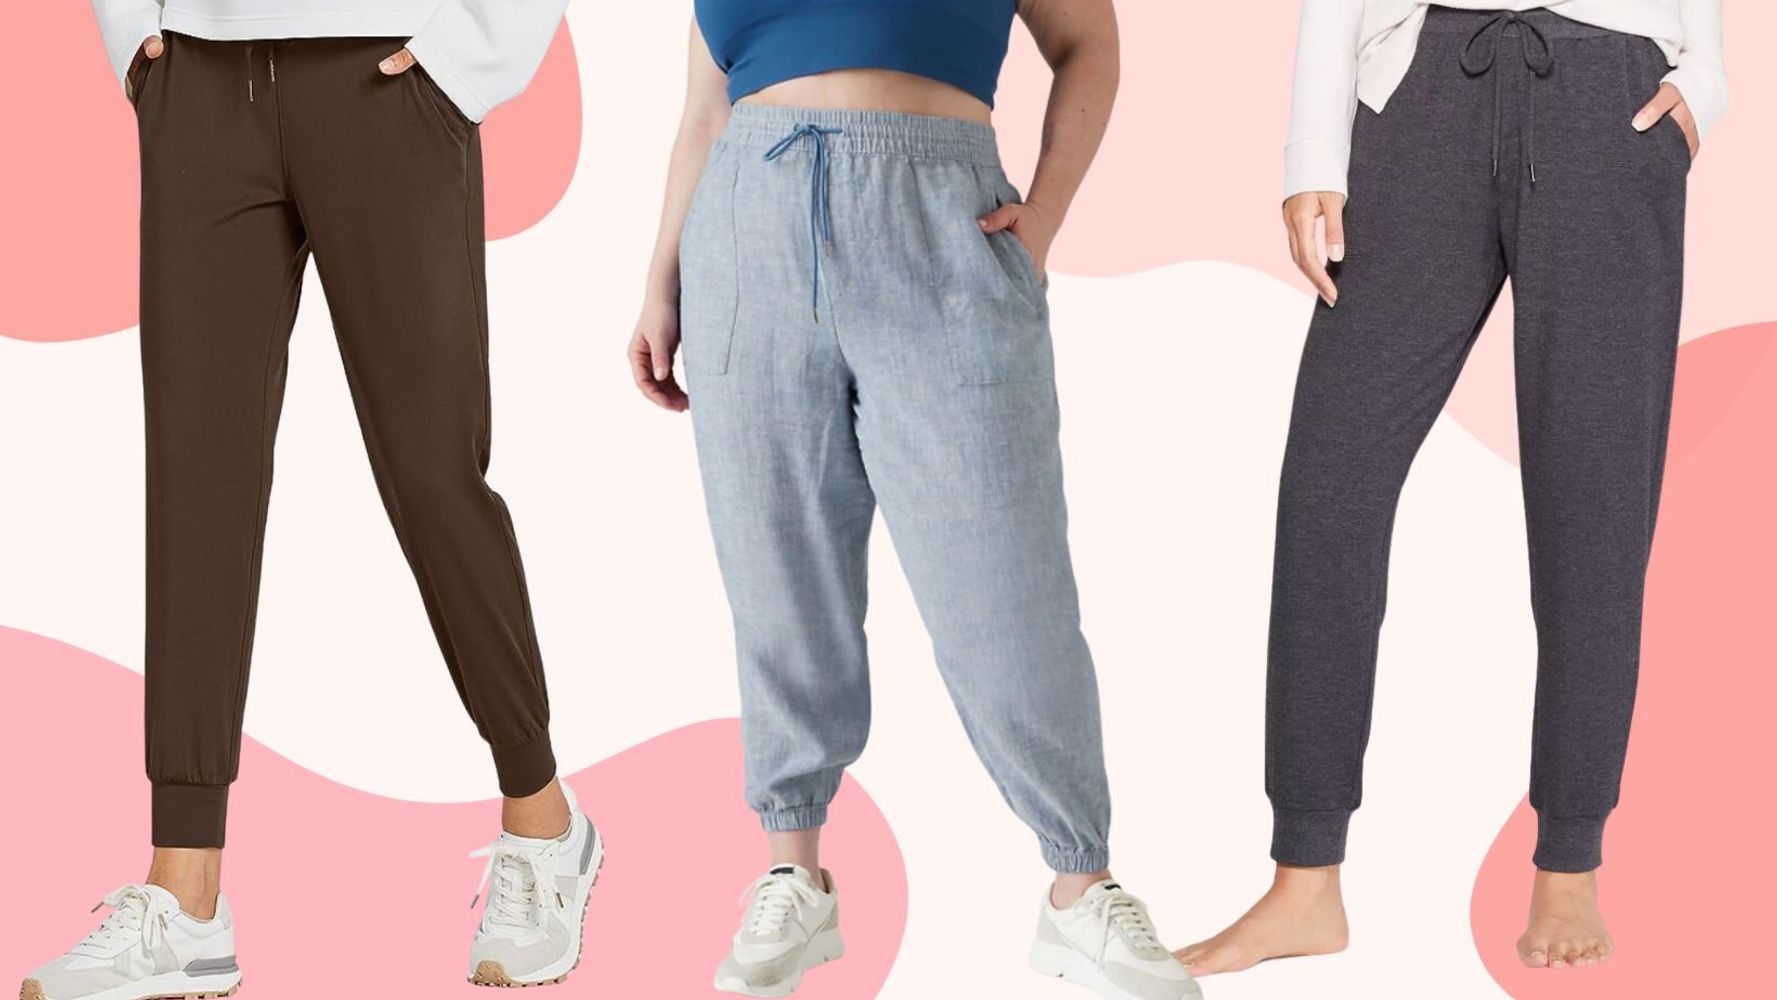 Didn't know flattering joggers existed': These comfy Hanes pants